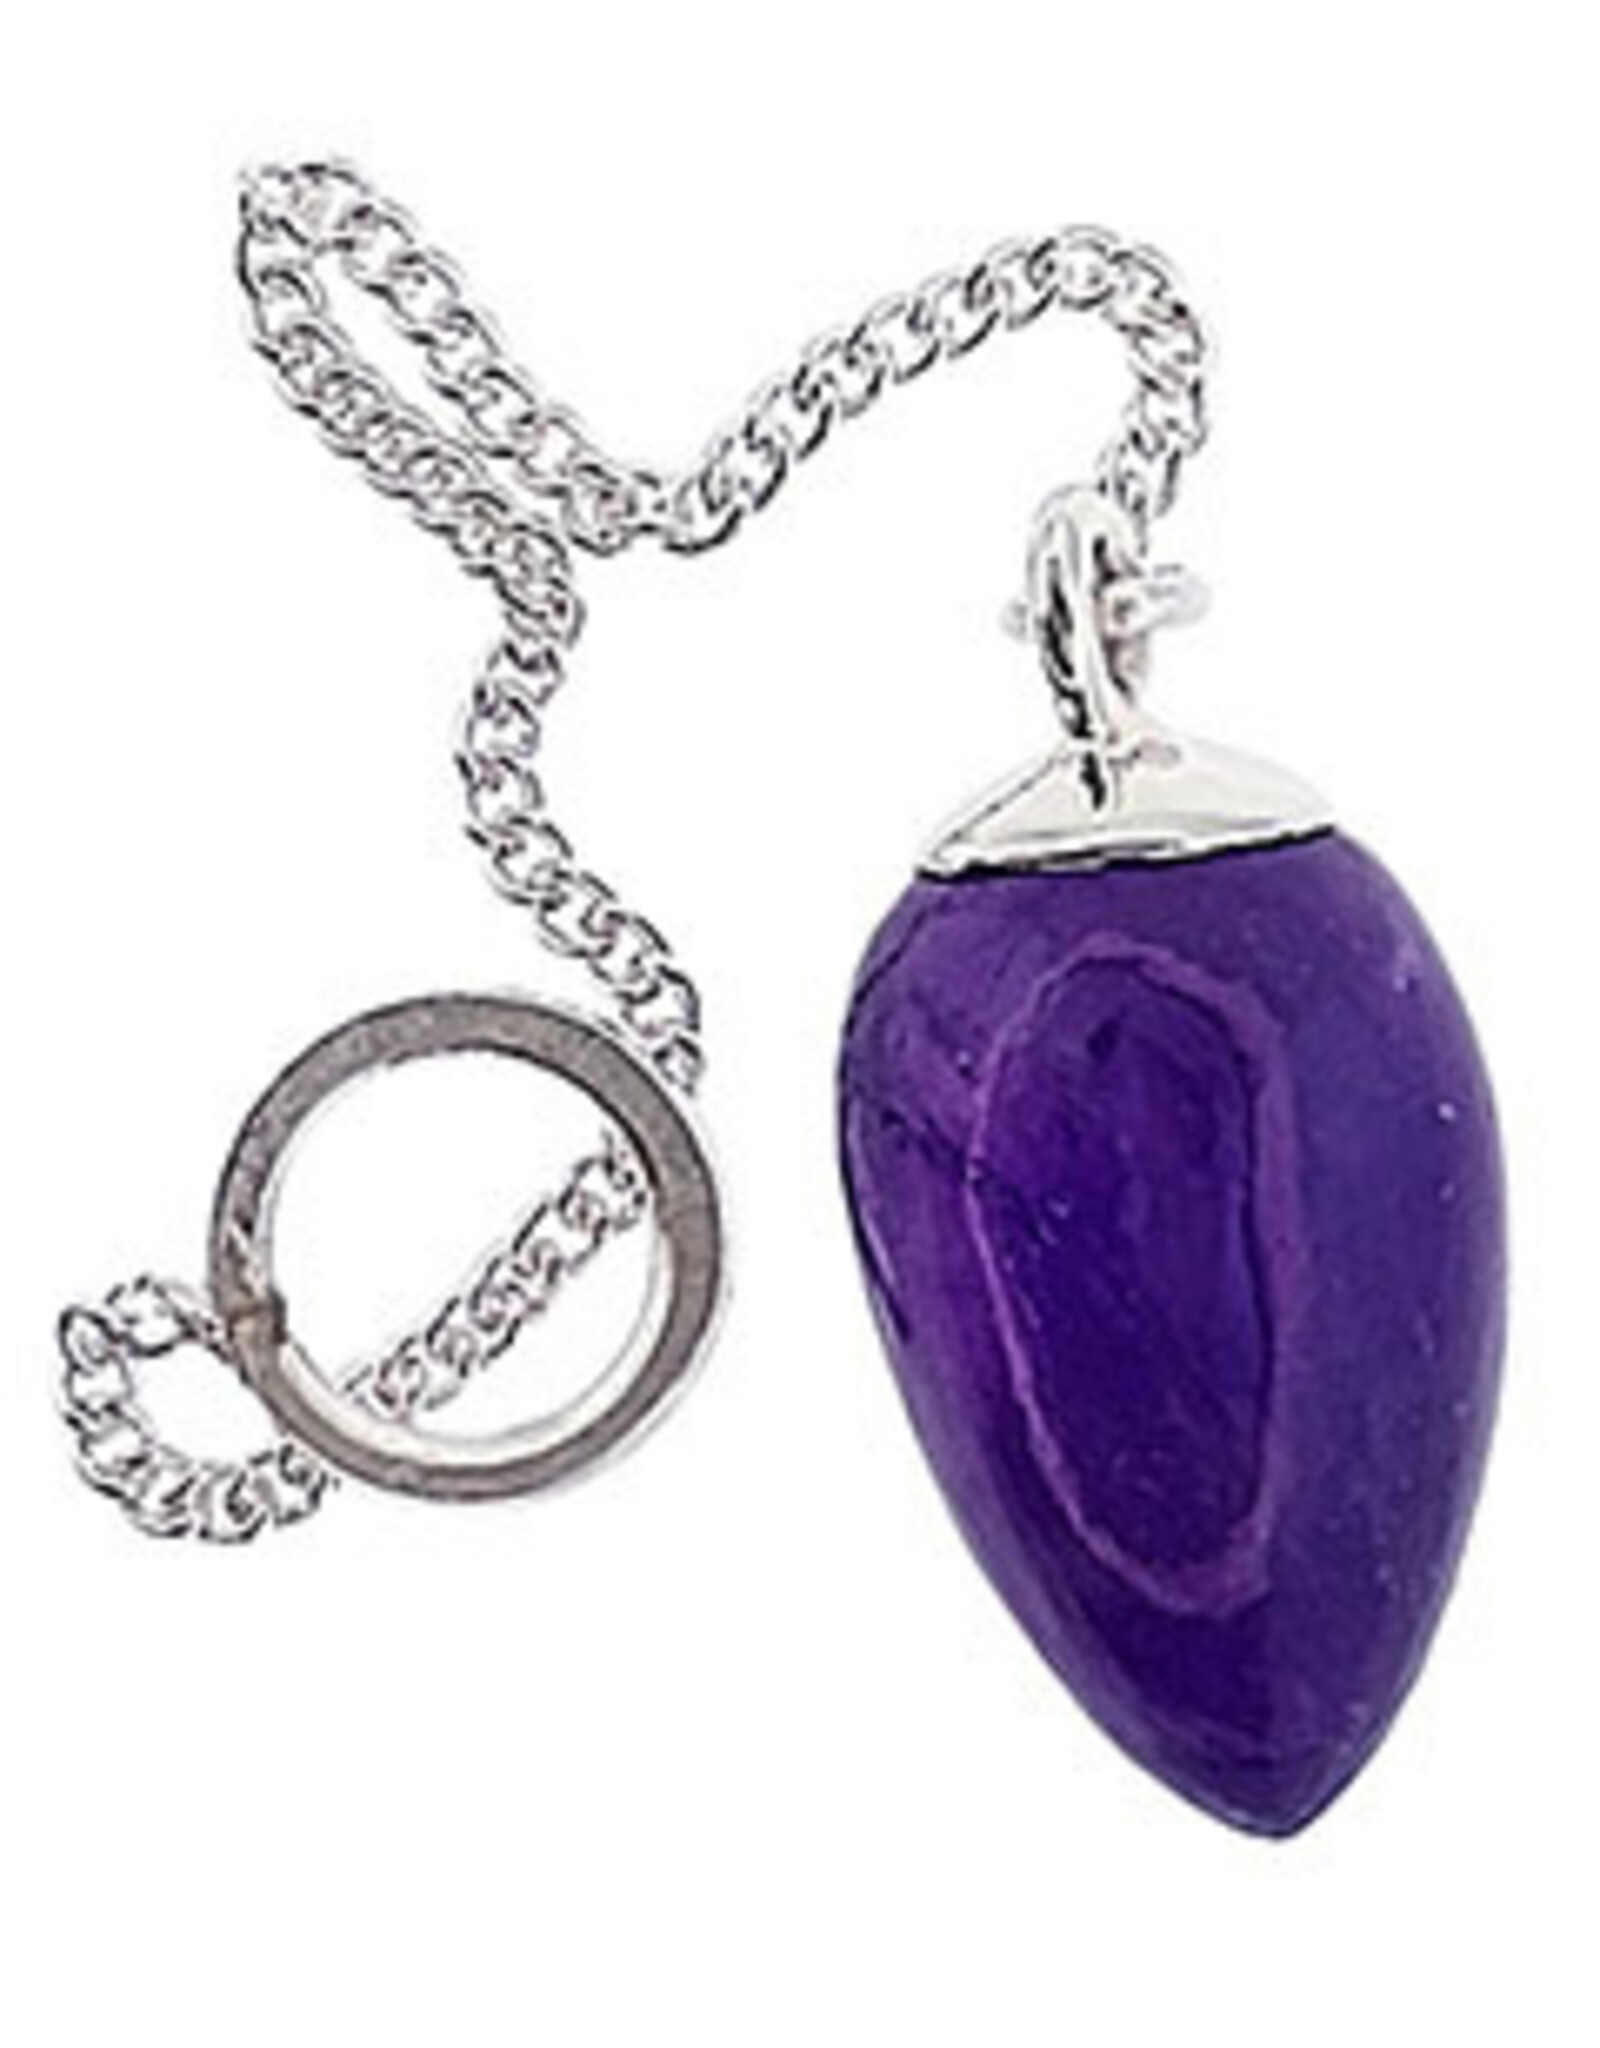 Amethyst Pendulum Necklace Sterling Silver